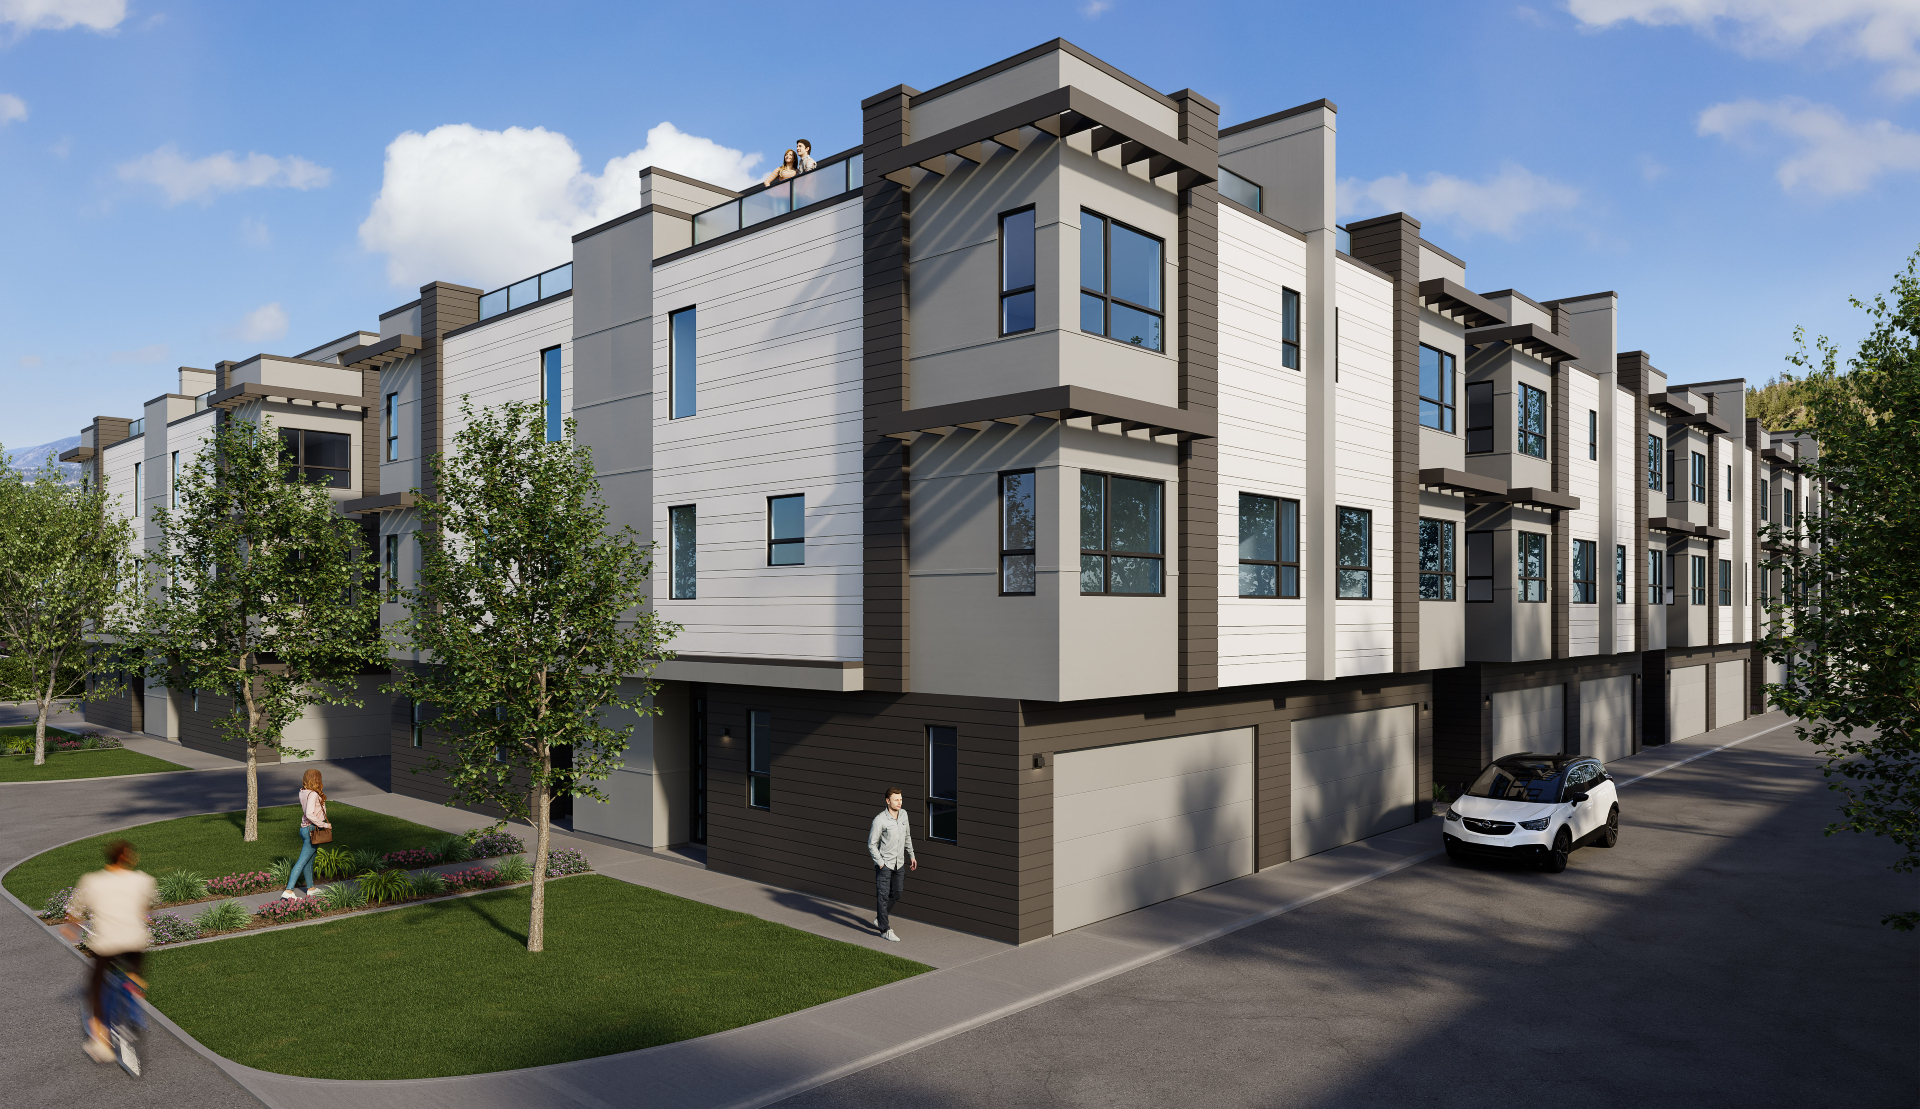 A collection of 40 Downtown 3-storey townhomes with 3 bedrooms and 2 1/2 bathrooms.